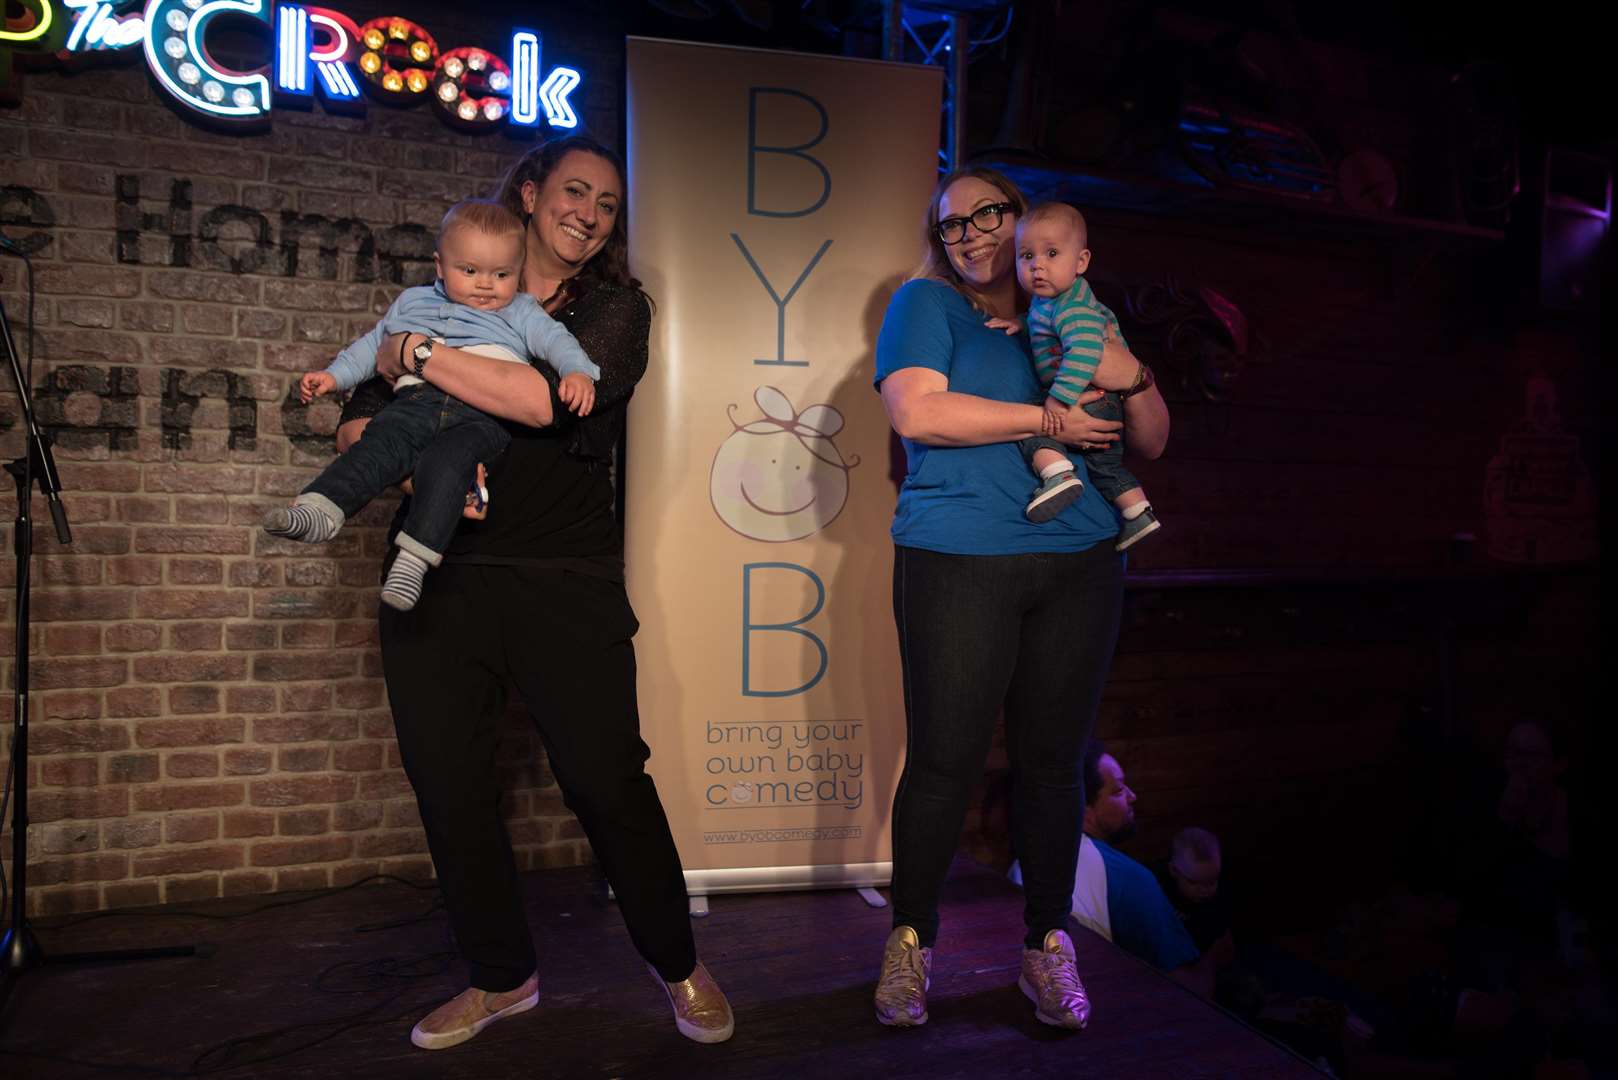 Bring Your Own Baby comedy is coming to Dartford (2216569)